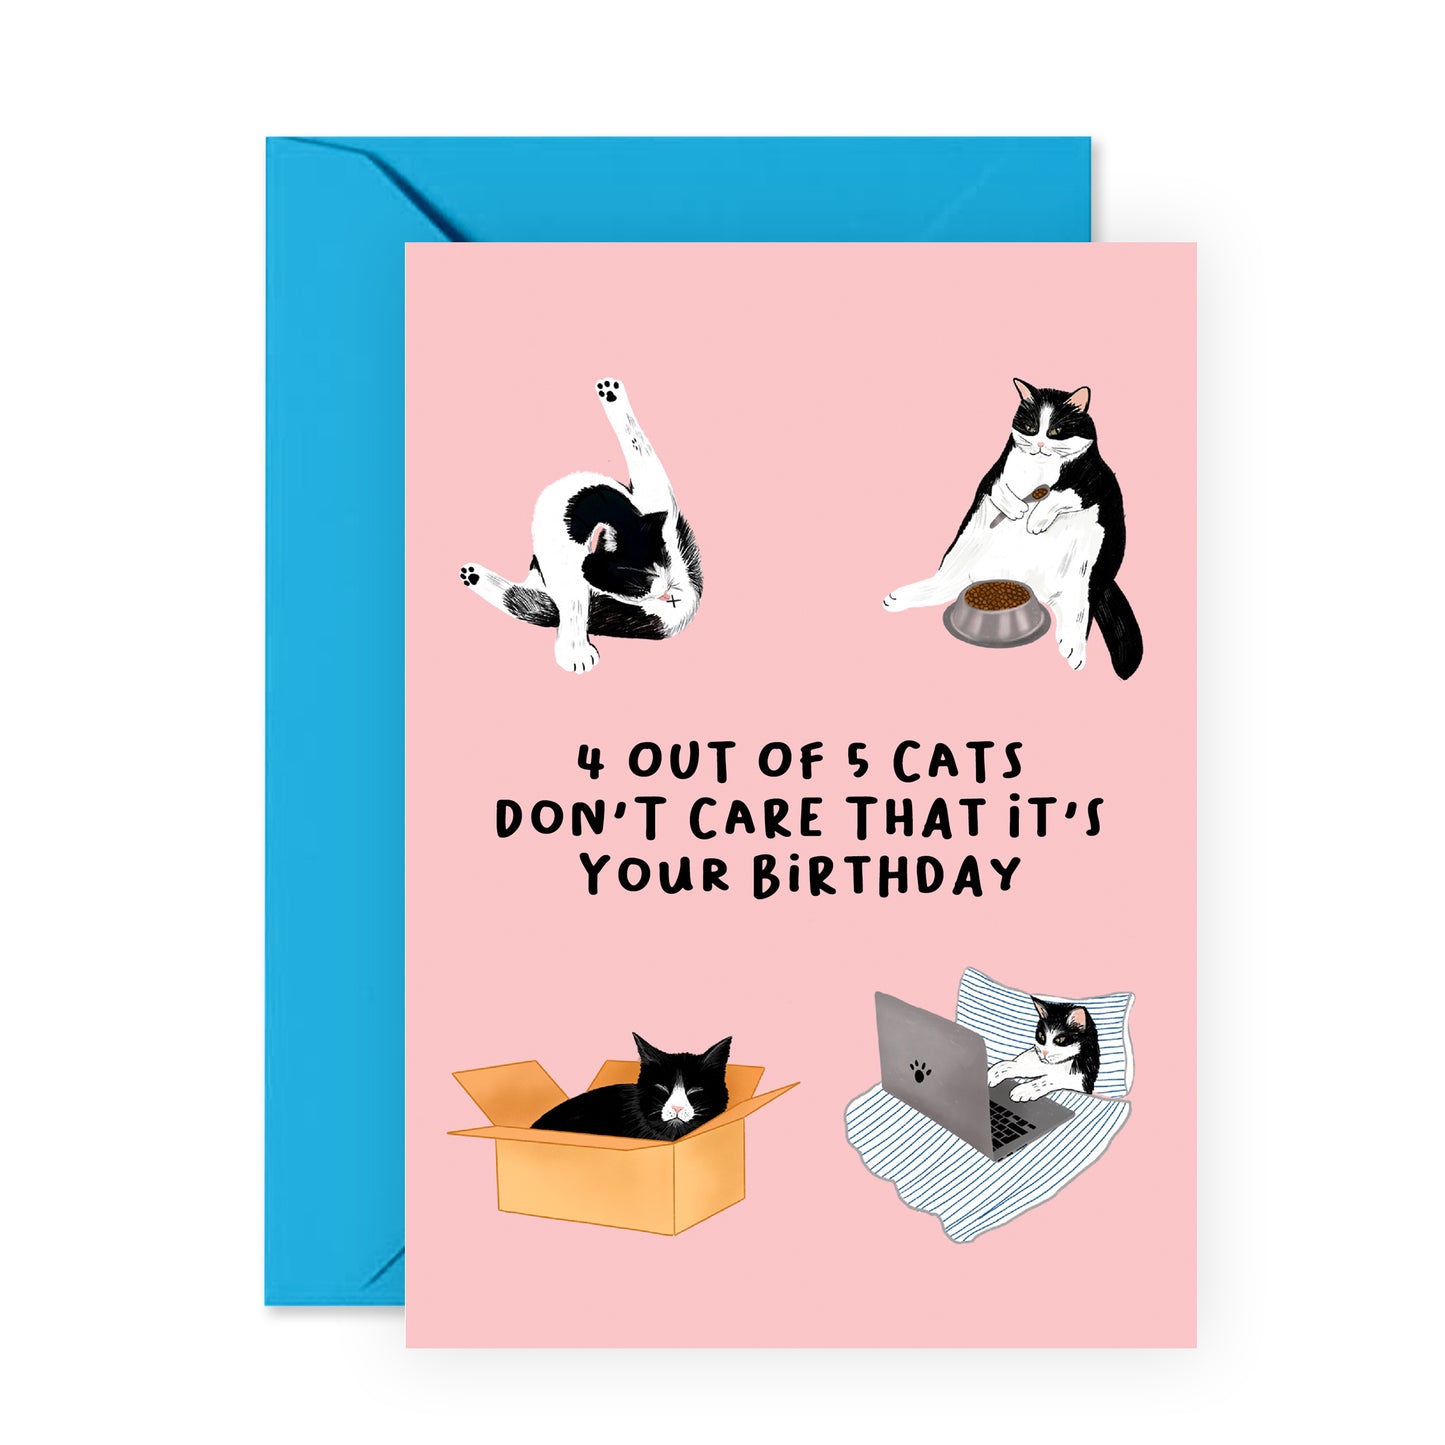 Funny Birthday Card - 4 Out Of 5 Cats - For Men Women Him Her Friends